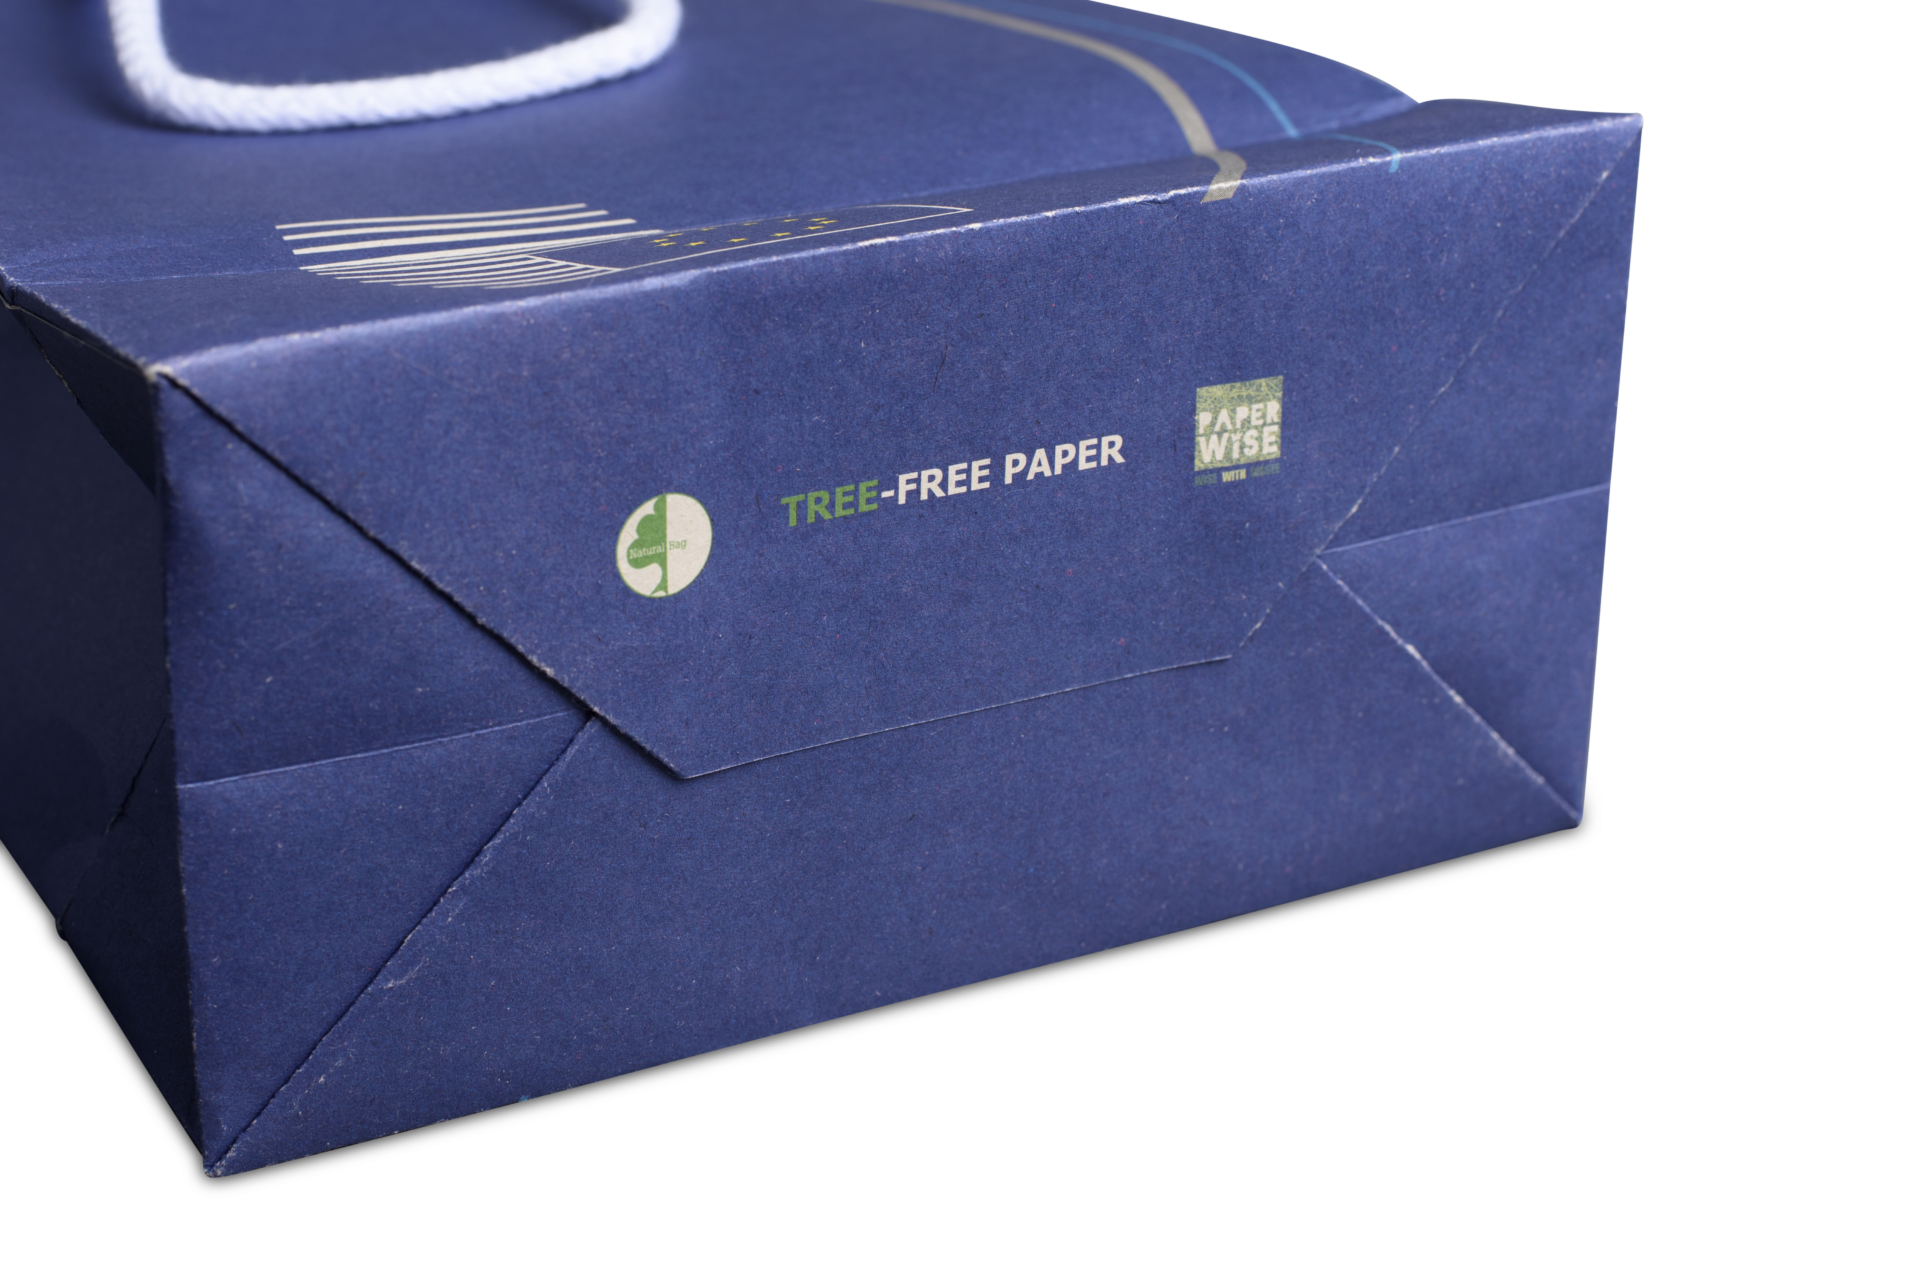 wp content uploads  0    0  eco friendly paper board agri waste paper bags co ntral treefree packaging natural bag ropean union 8